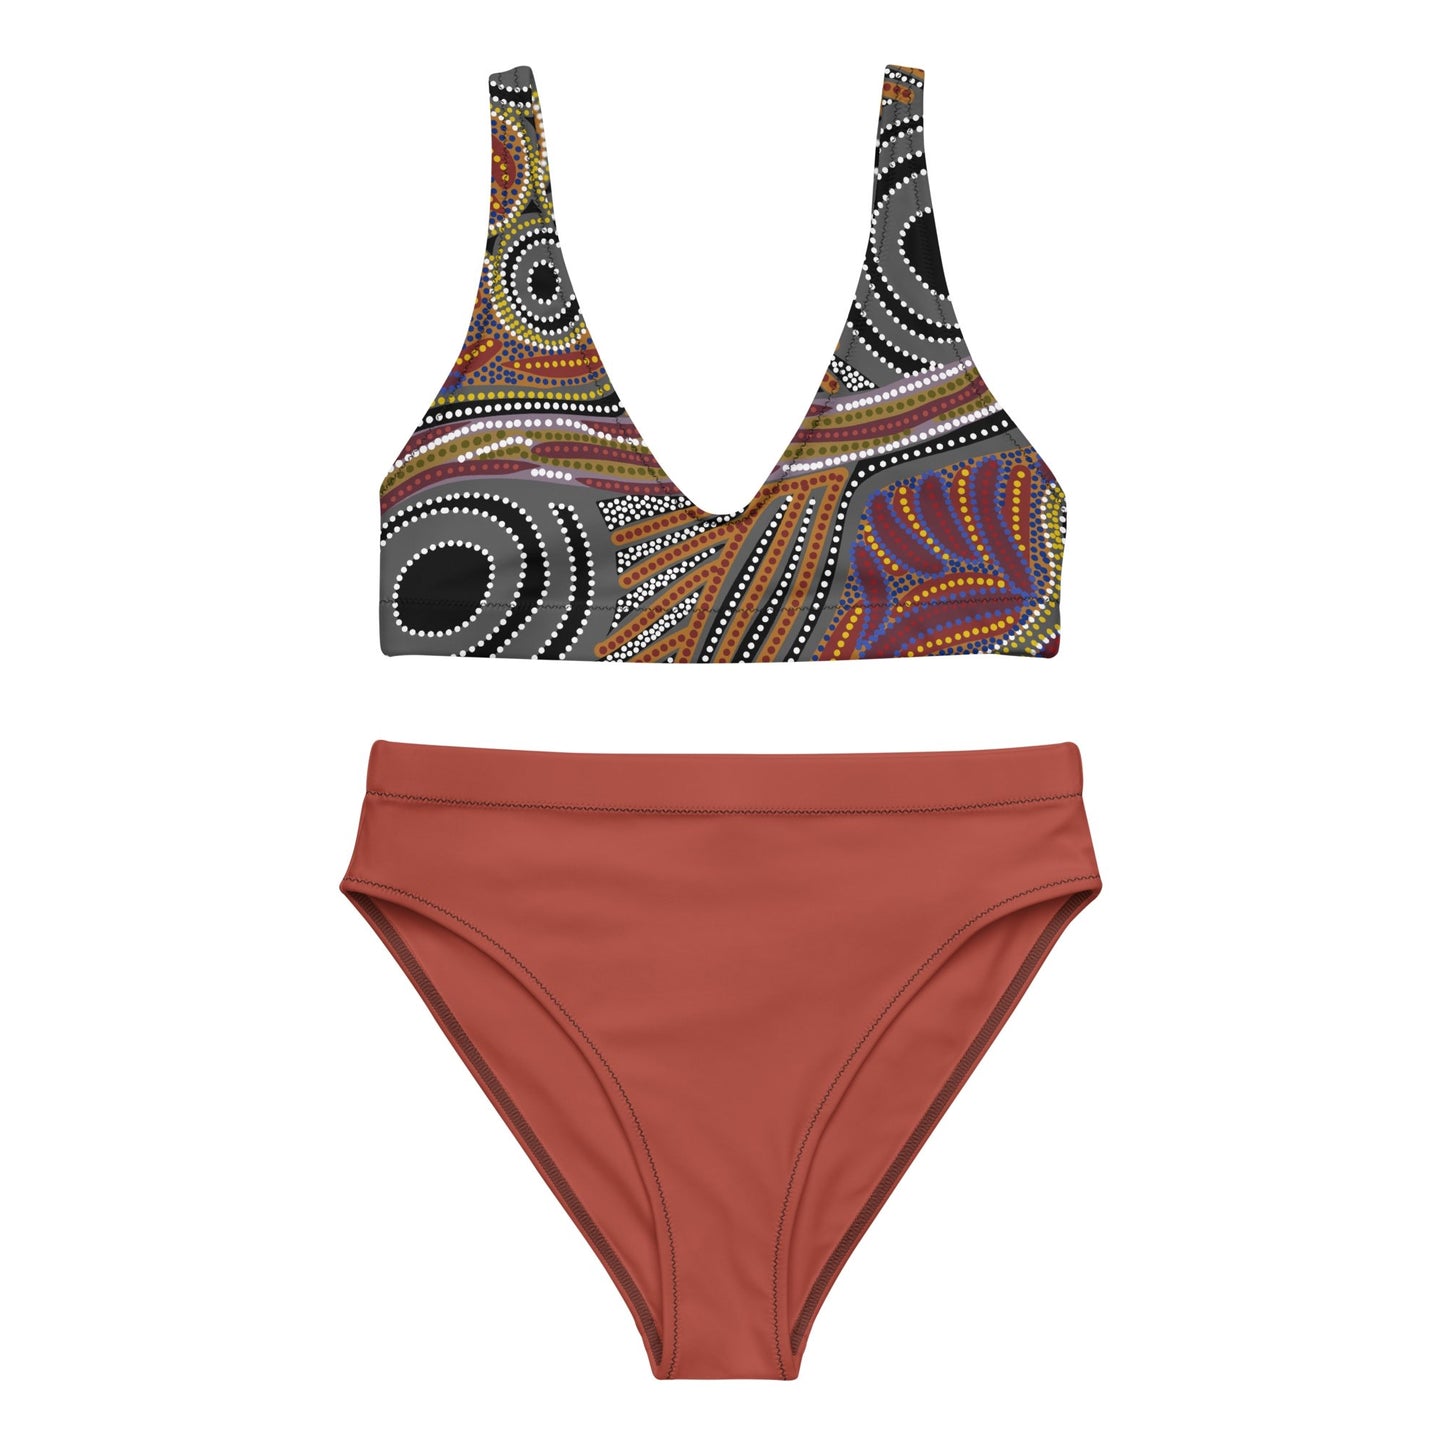 Kungka in Red - High Waisted Sustainable Swimsuit Separates - Milpali Swimwear